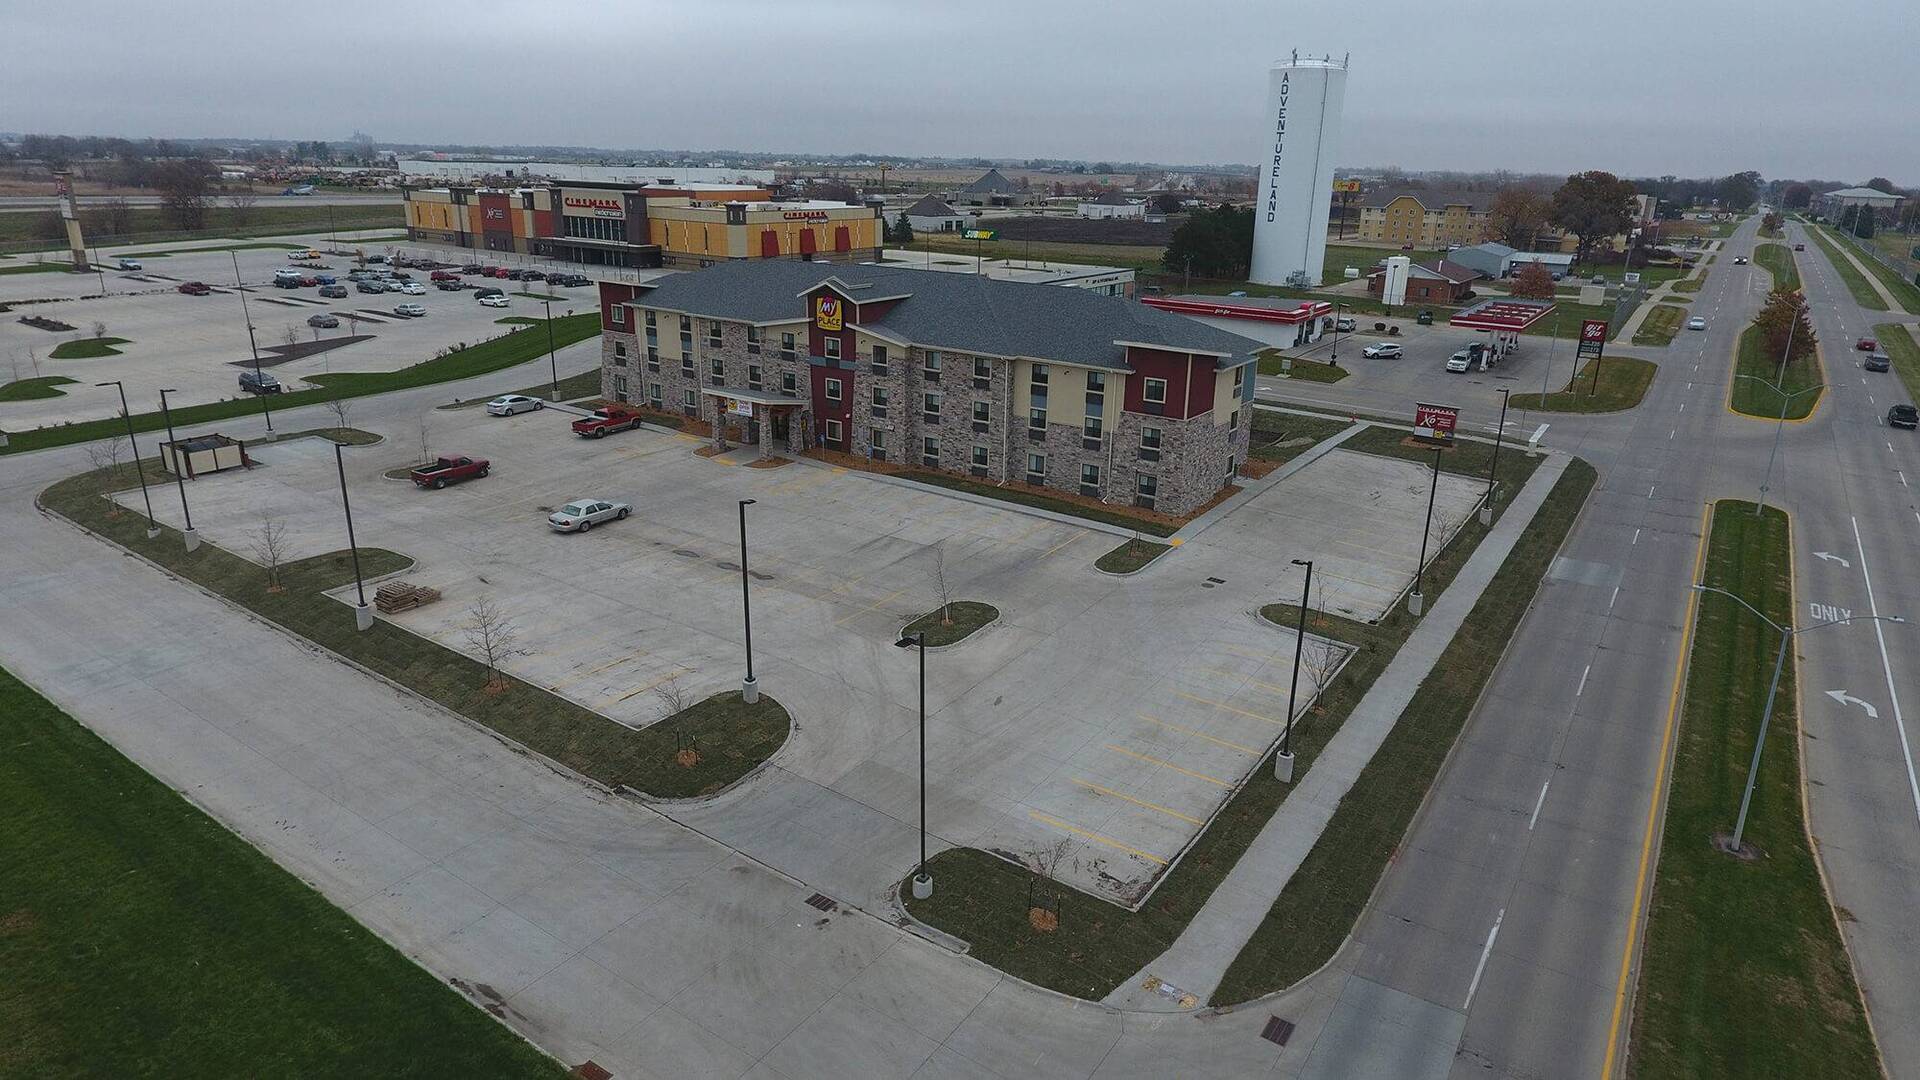 An aerial shot of My Place Hotel in Altoona, IA.